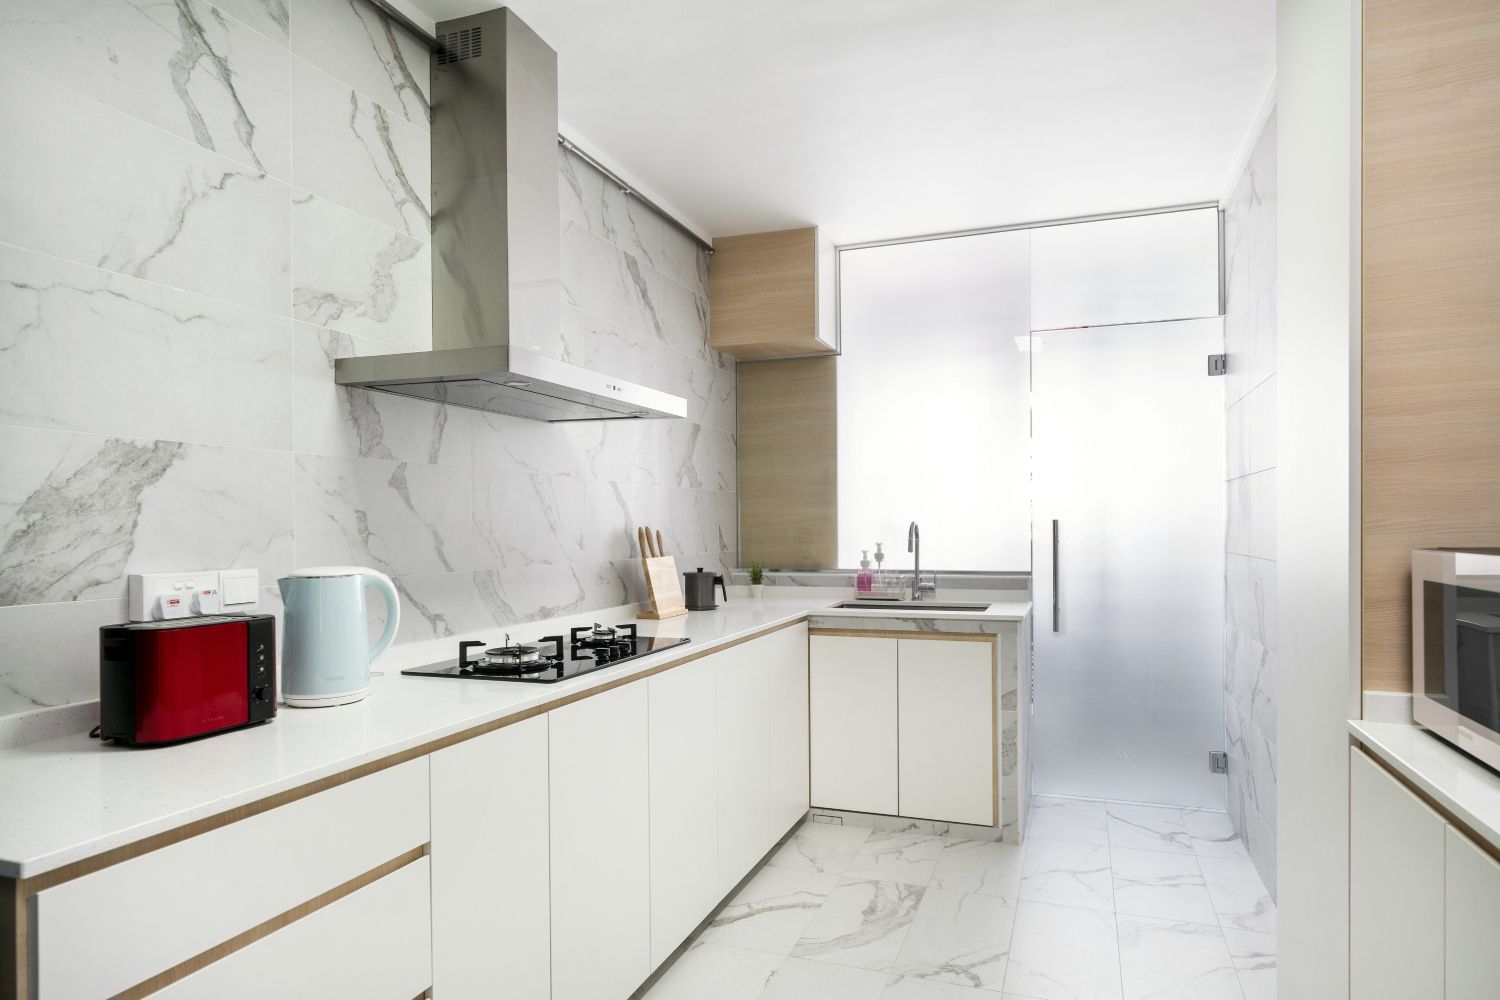 Scandinavian Design For Kitchens With White Marble Wall Dado